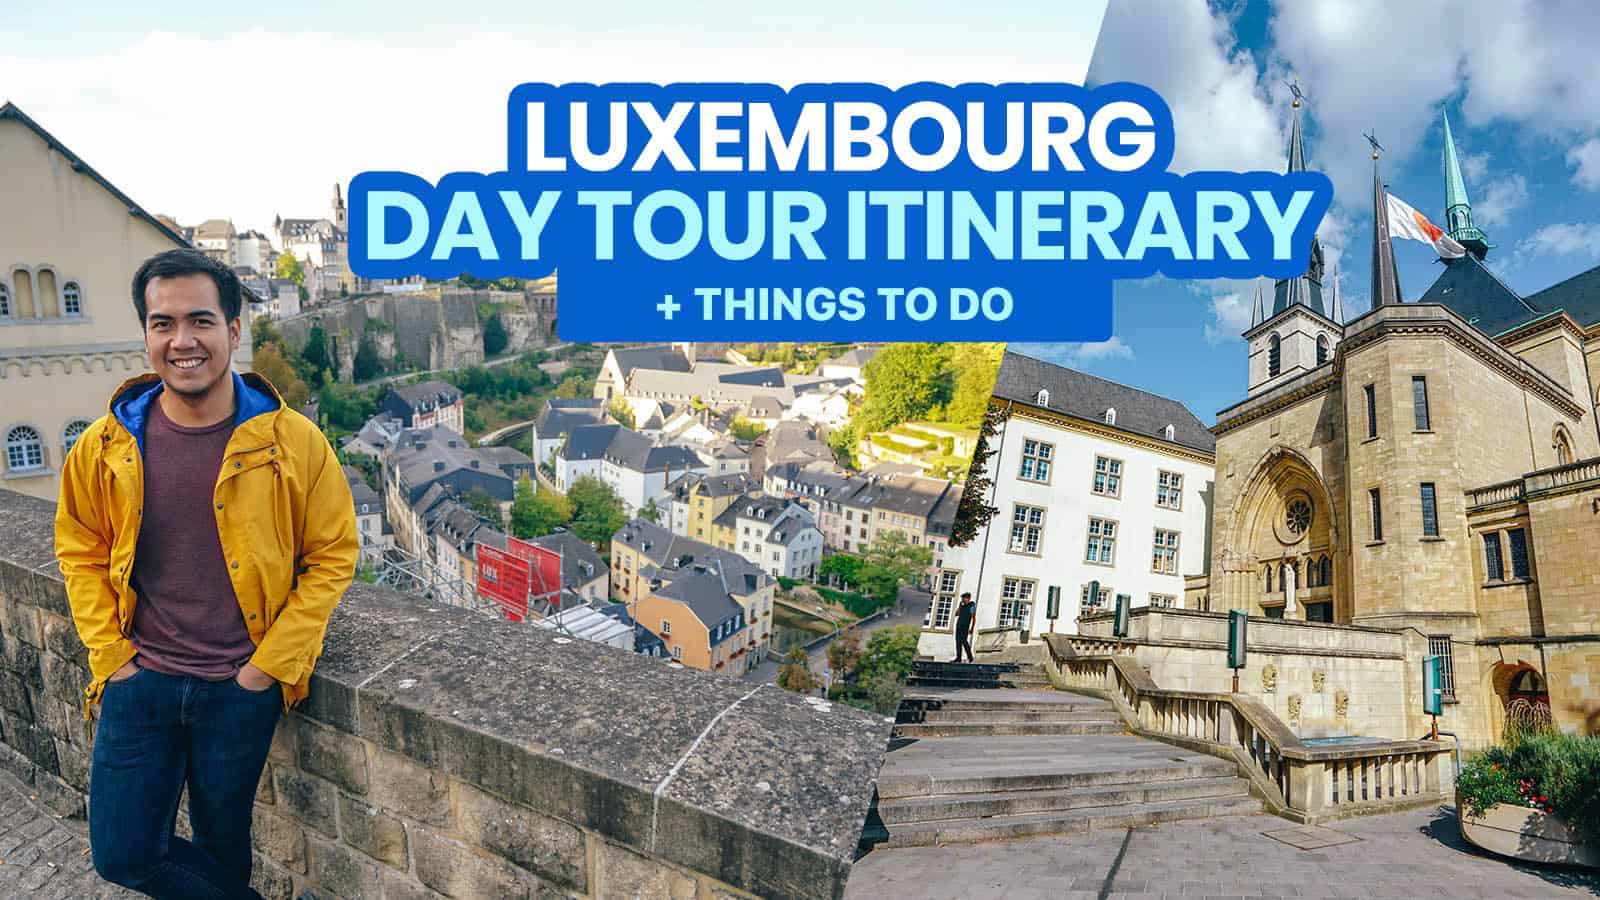 LUXEMBOURG DAY TOUR ITINERARY: 15 Things to Do & Walking Route